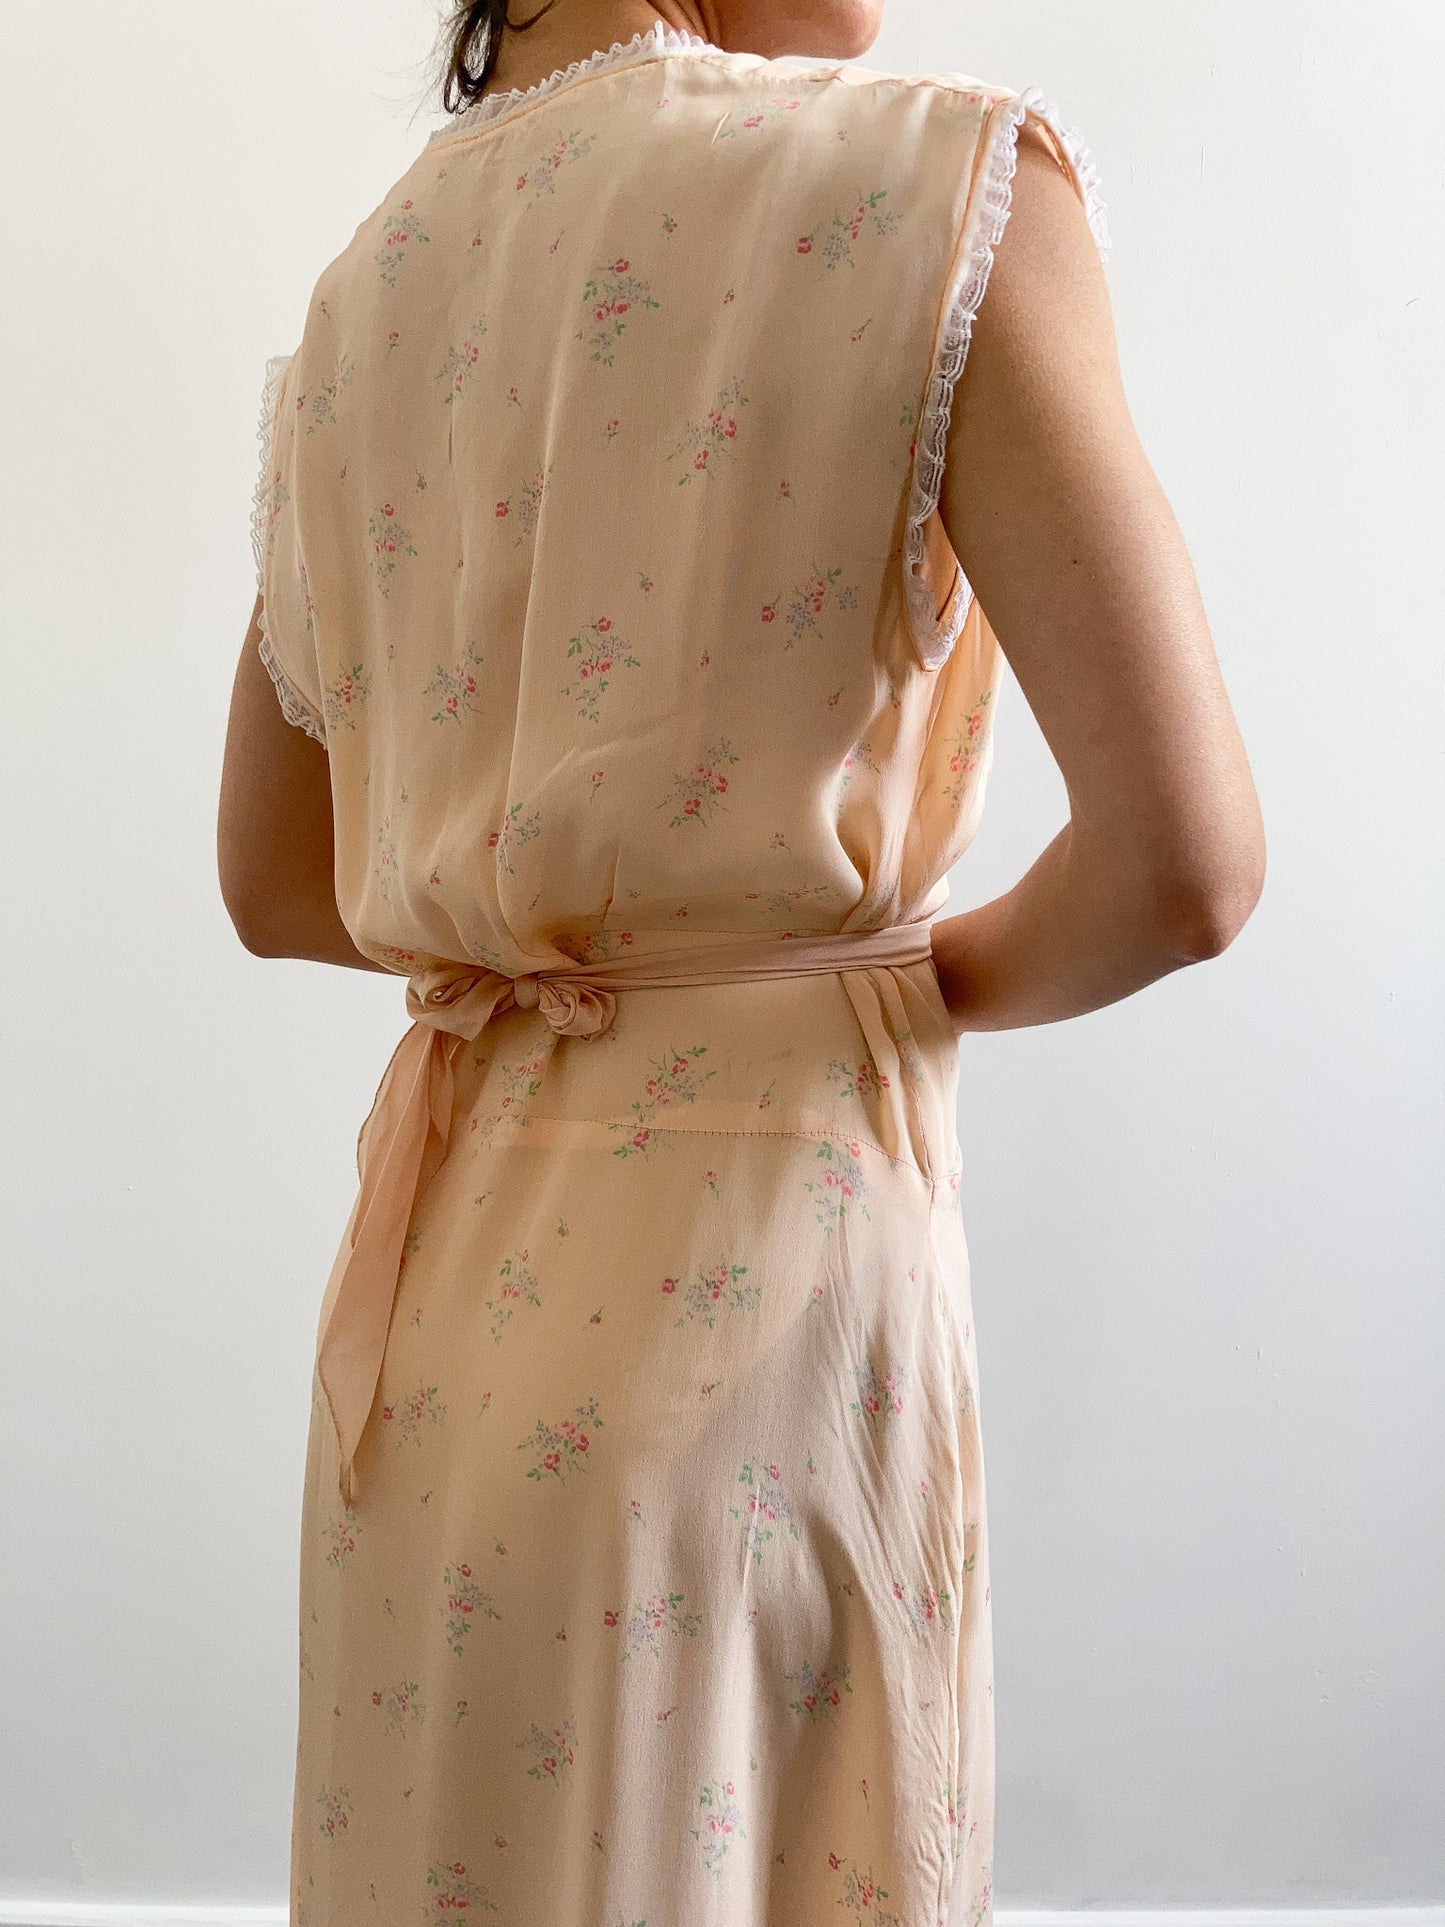 1940s Ditsy Floral Peach Slip Gown with Lace Trim